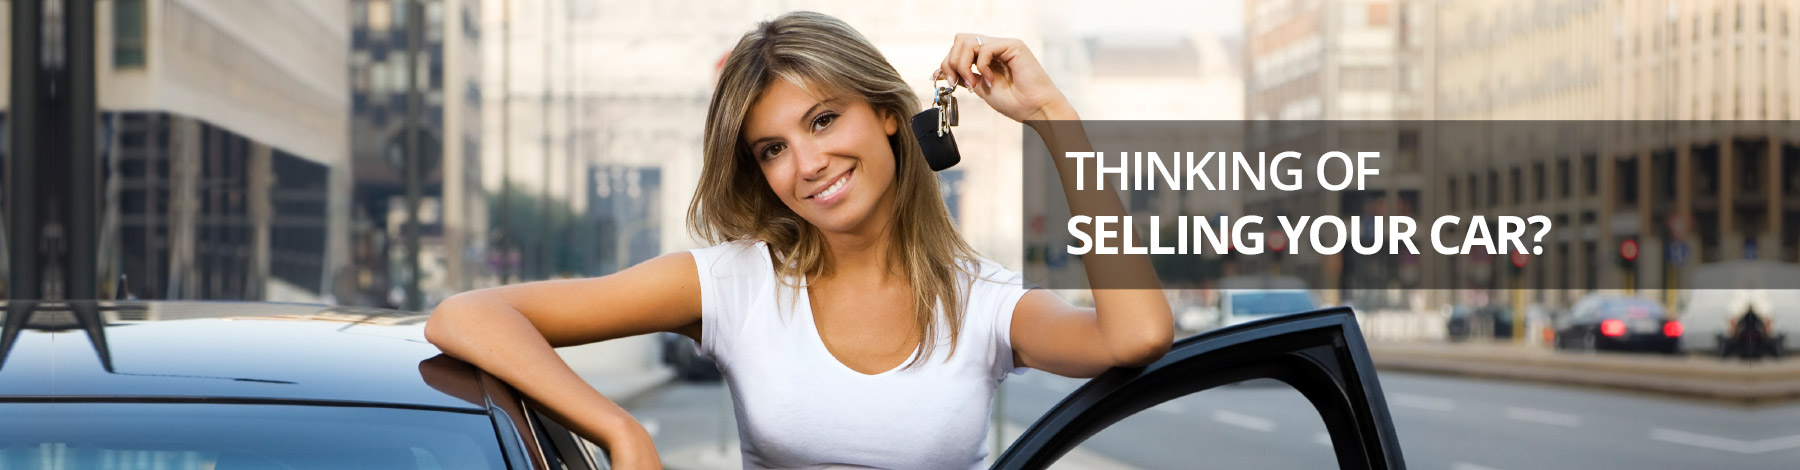 15-selling-your-car